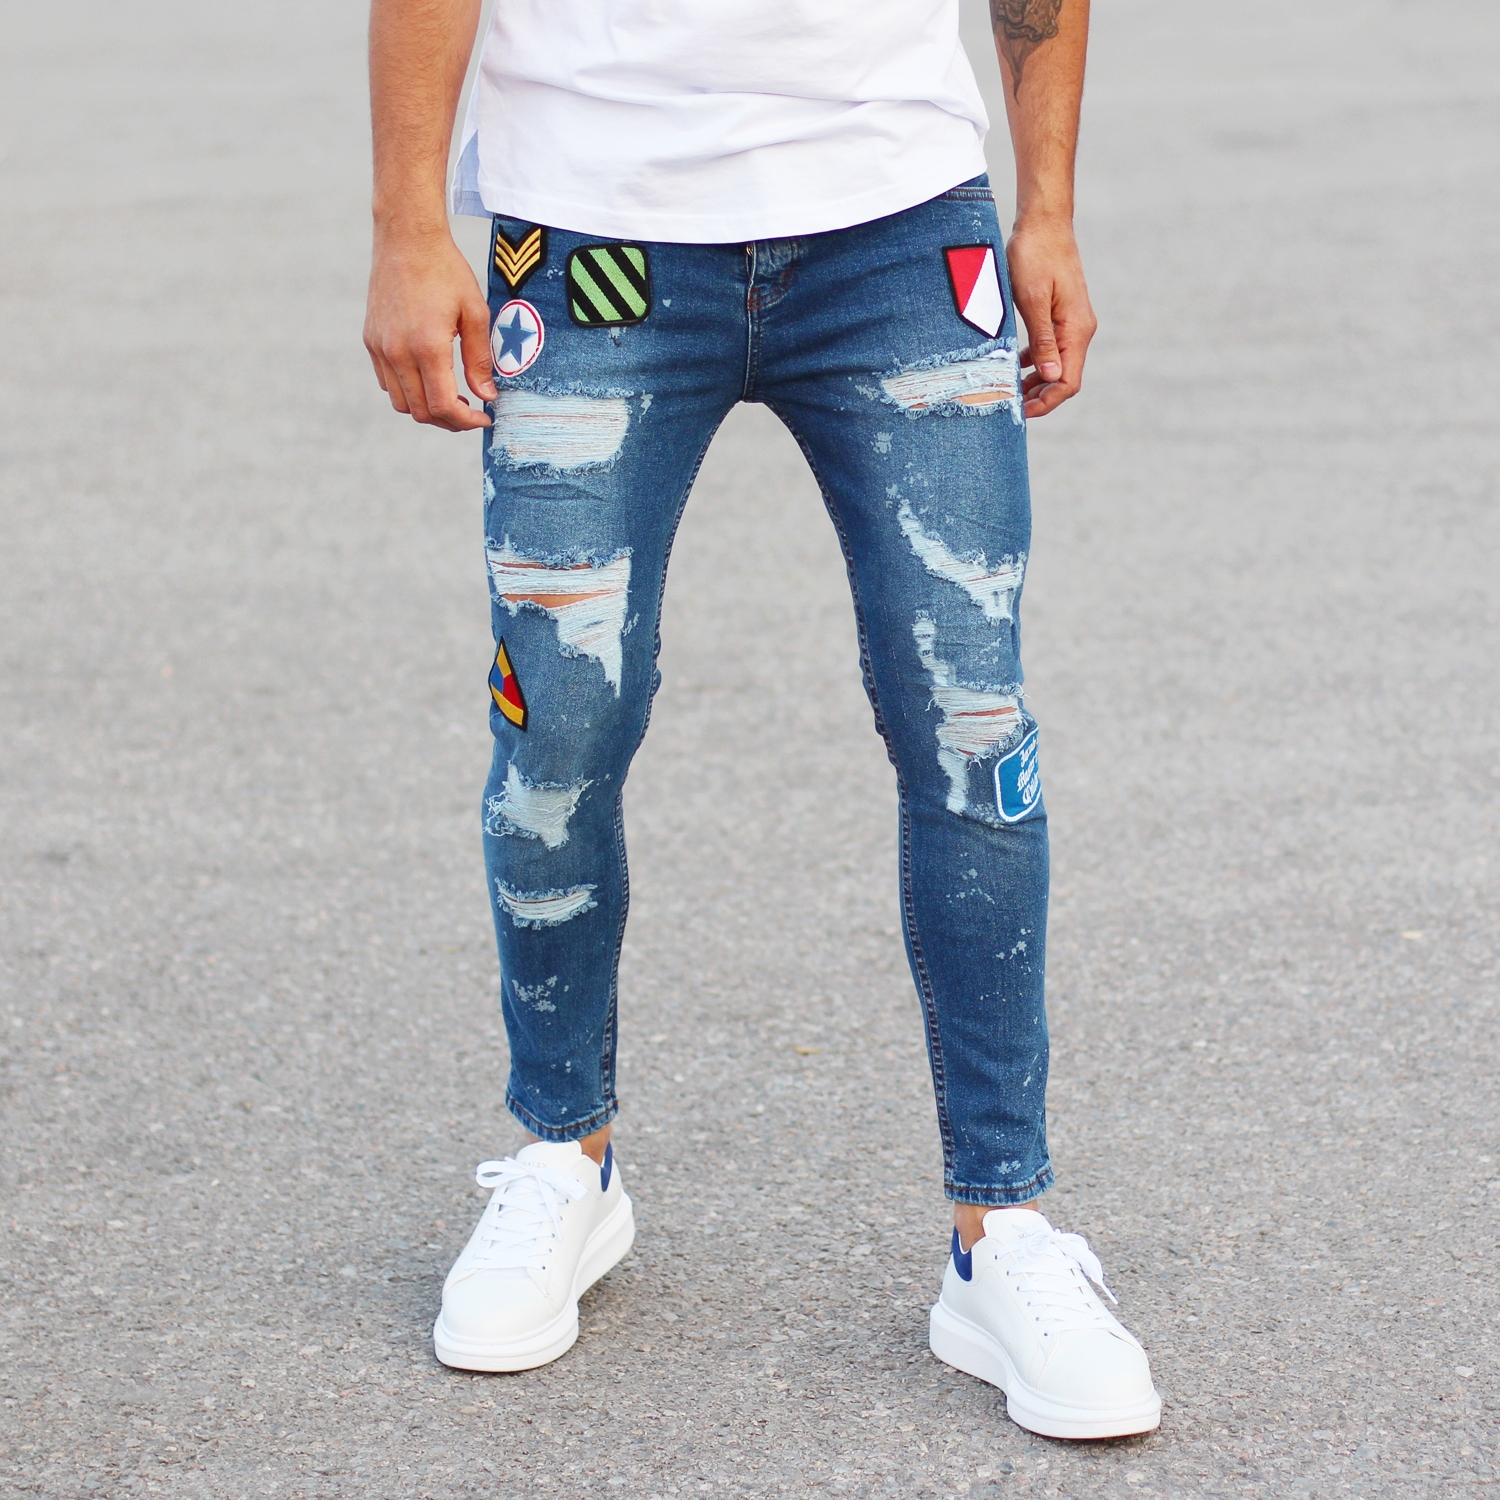 Men's Patchwork Jeans With Heavy Rips Blue